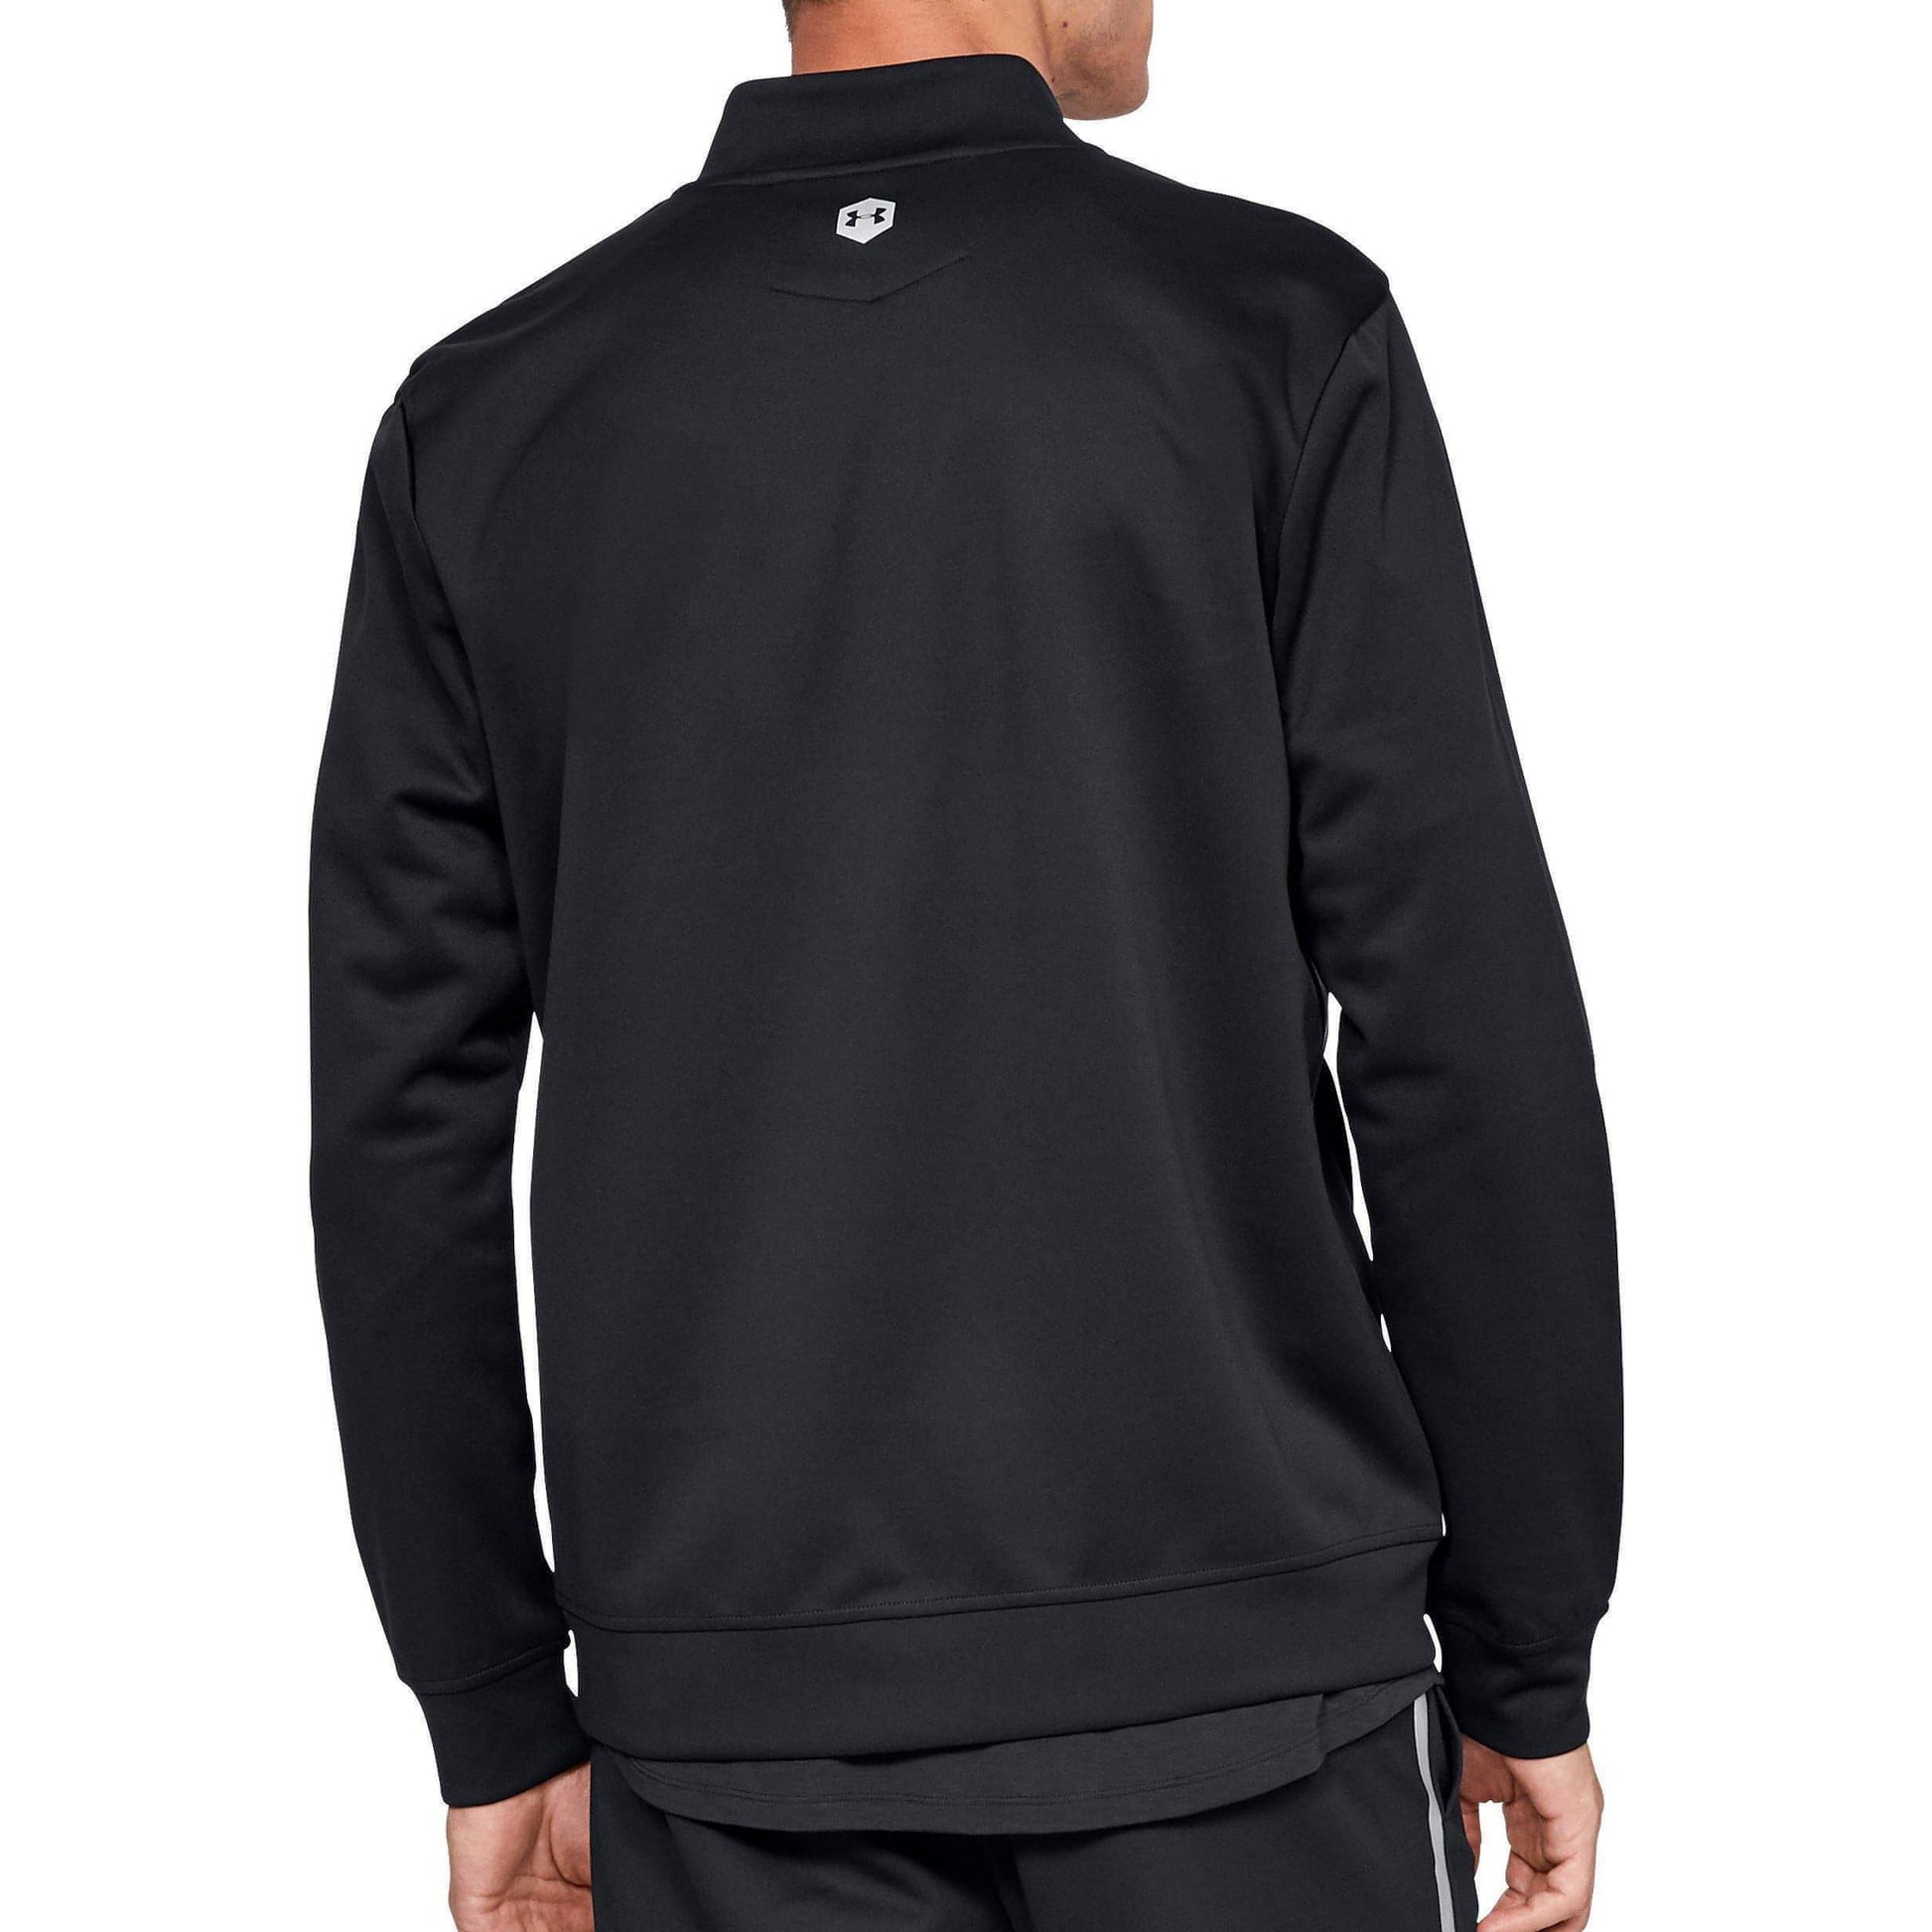 Under Armour Recovery Mens Track Jacket - Black - Start Fitness